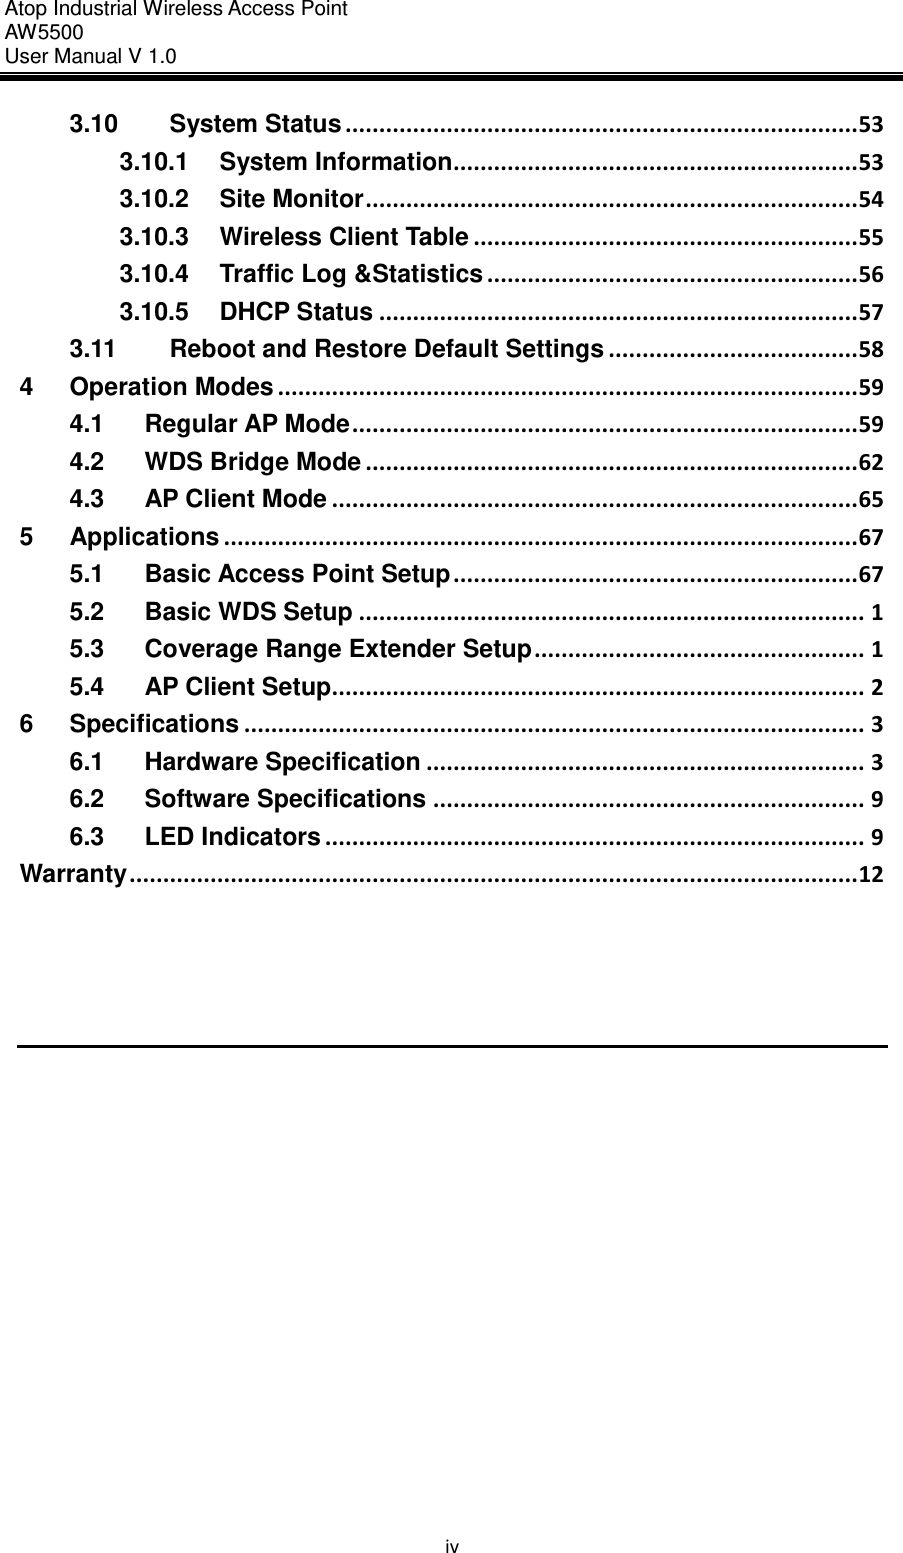 Atop Industrial Wireless Access Point AW 5500 User Manual V 1.0                      iv 3.10 System Status ............................................................................ 53 3.10.1 System Information............................................................ 53 3.10.2 Site Monitor ......................................................................... 54 3.10.3 Wireless Client Table ......................................................... 55 3.10.4 Traffic Log &amp;Statistics ....................................................... 56 3.10.5 DHCP Status ....................................................................... 57 3.11 Reboot and Restore Default Settings ..................................... 58 4 Operation Modes ...................................................................................... 59 4.1 Regular AP Mode ........................................................................... 59 4.2 WDS Bridge Mode ......................................................................... 62 4.3 AP Client Mode .............................................................................. 65 5 Applications .............................................................................................. 67 5.1 Basic Access Point Setup ............................................................ 67 5.2 Basic WDS Setup ........................................................................... 1 5.3 Coverage Range Extender Setup ................................................. 1 5.4 AP Client Setup............................................................................... 2 6 Specifications ............................................................................................ 3 6.1 Hardware Specification ................................................................. 3 6.2 Software Specifications ................................................................ 9 6.3 LED Indicators ................................................................................ 9 Warranty ............................................................................................................ 12     